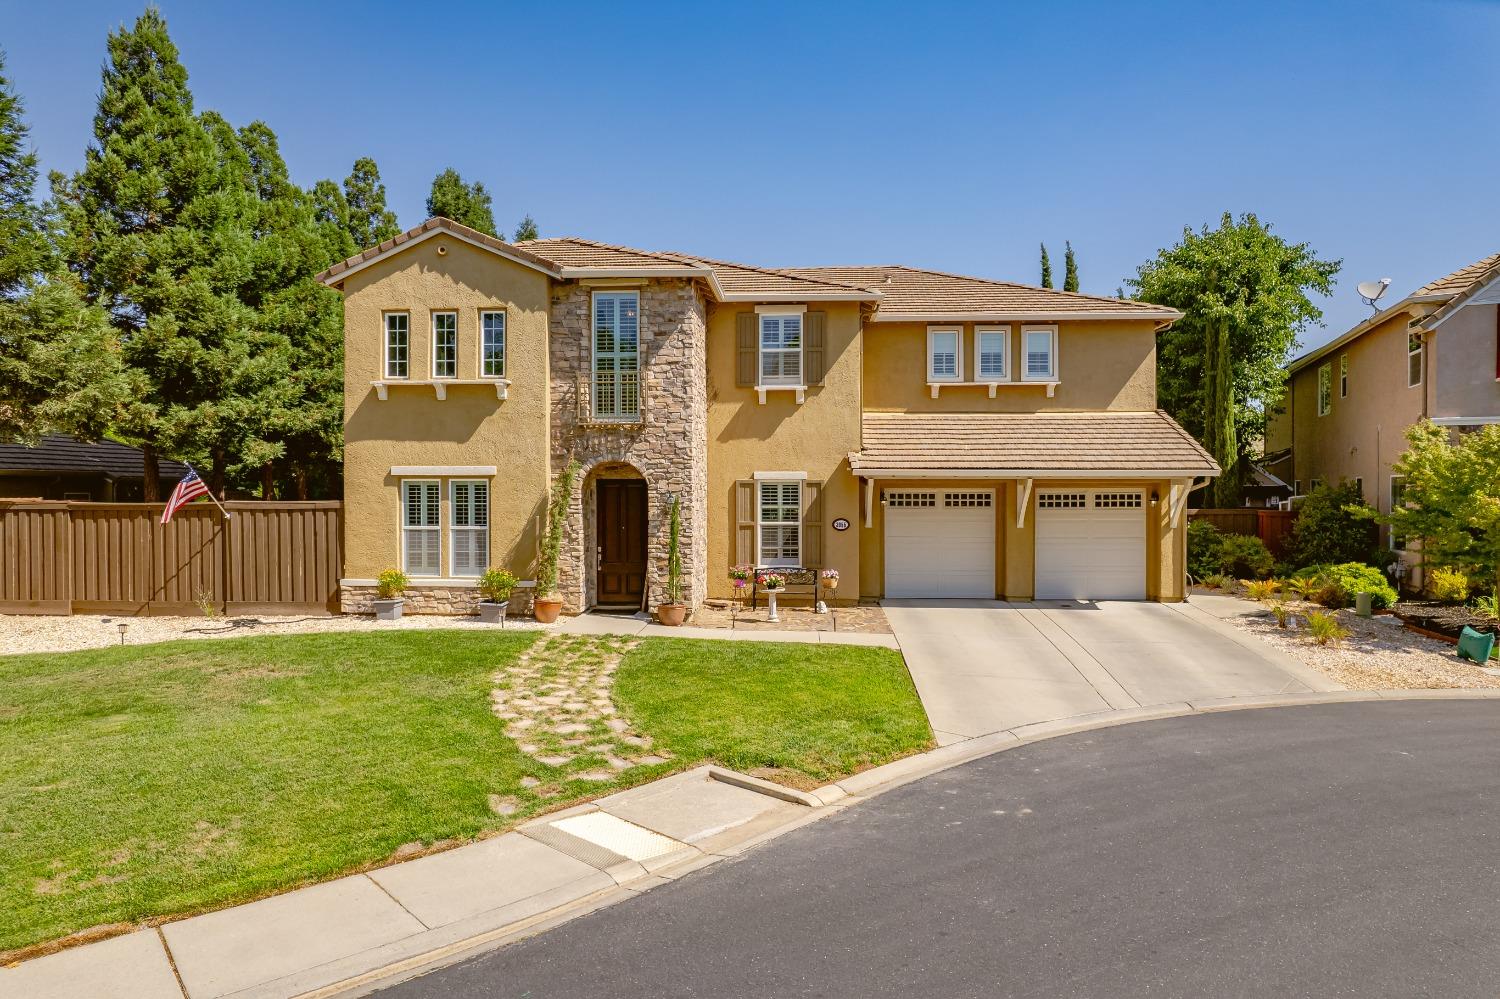 Photo of 3955-3955 Crystal Downs Ct in Roseville, CA